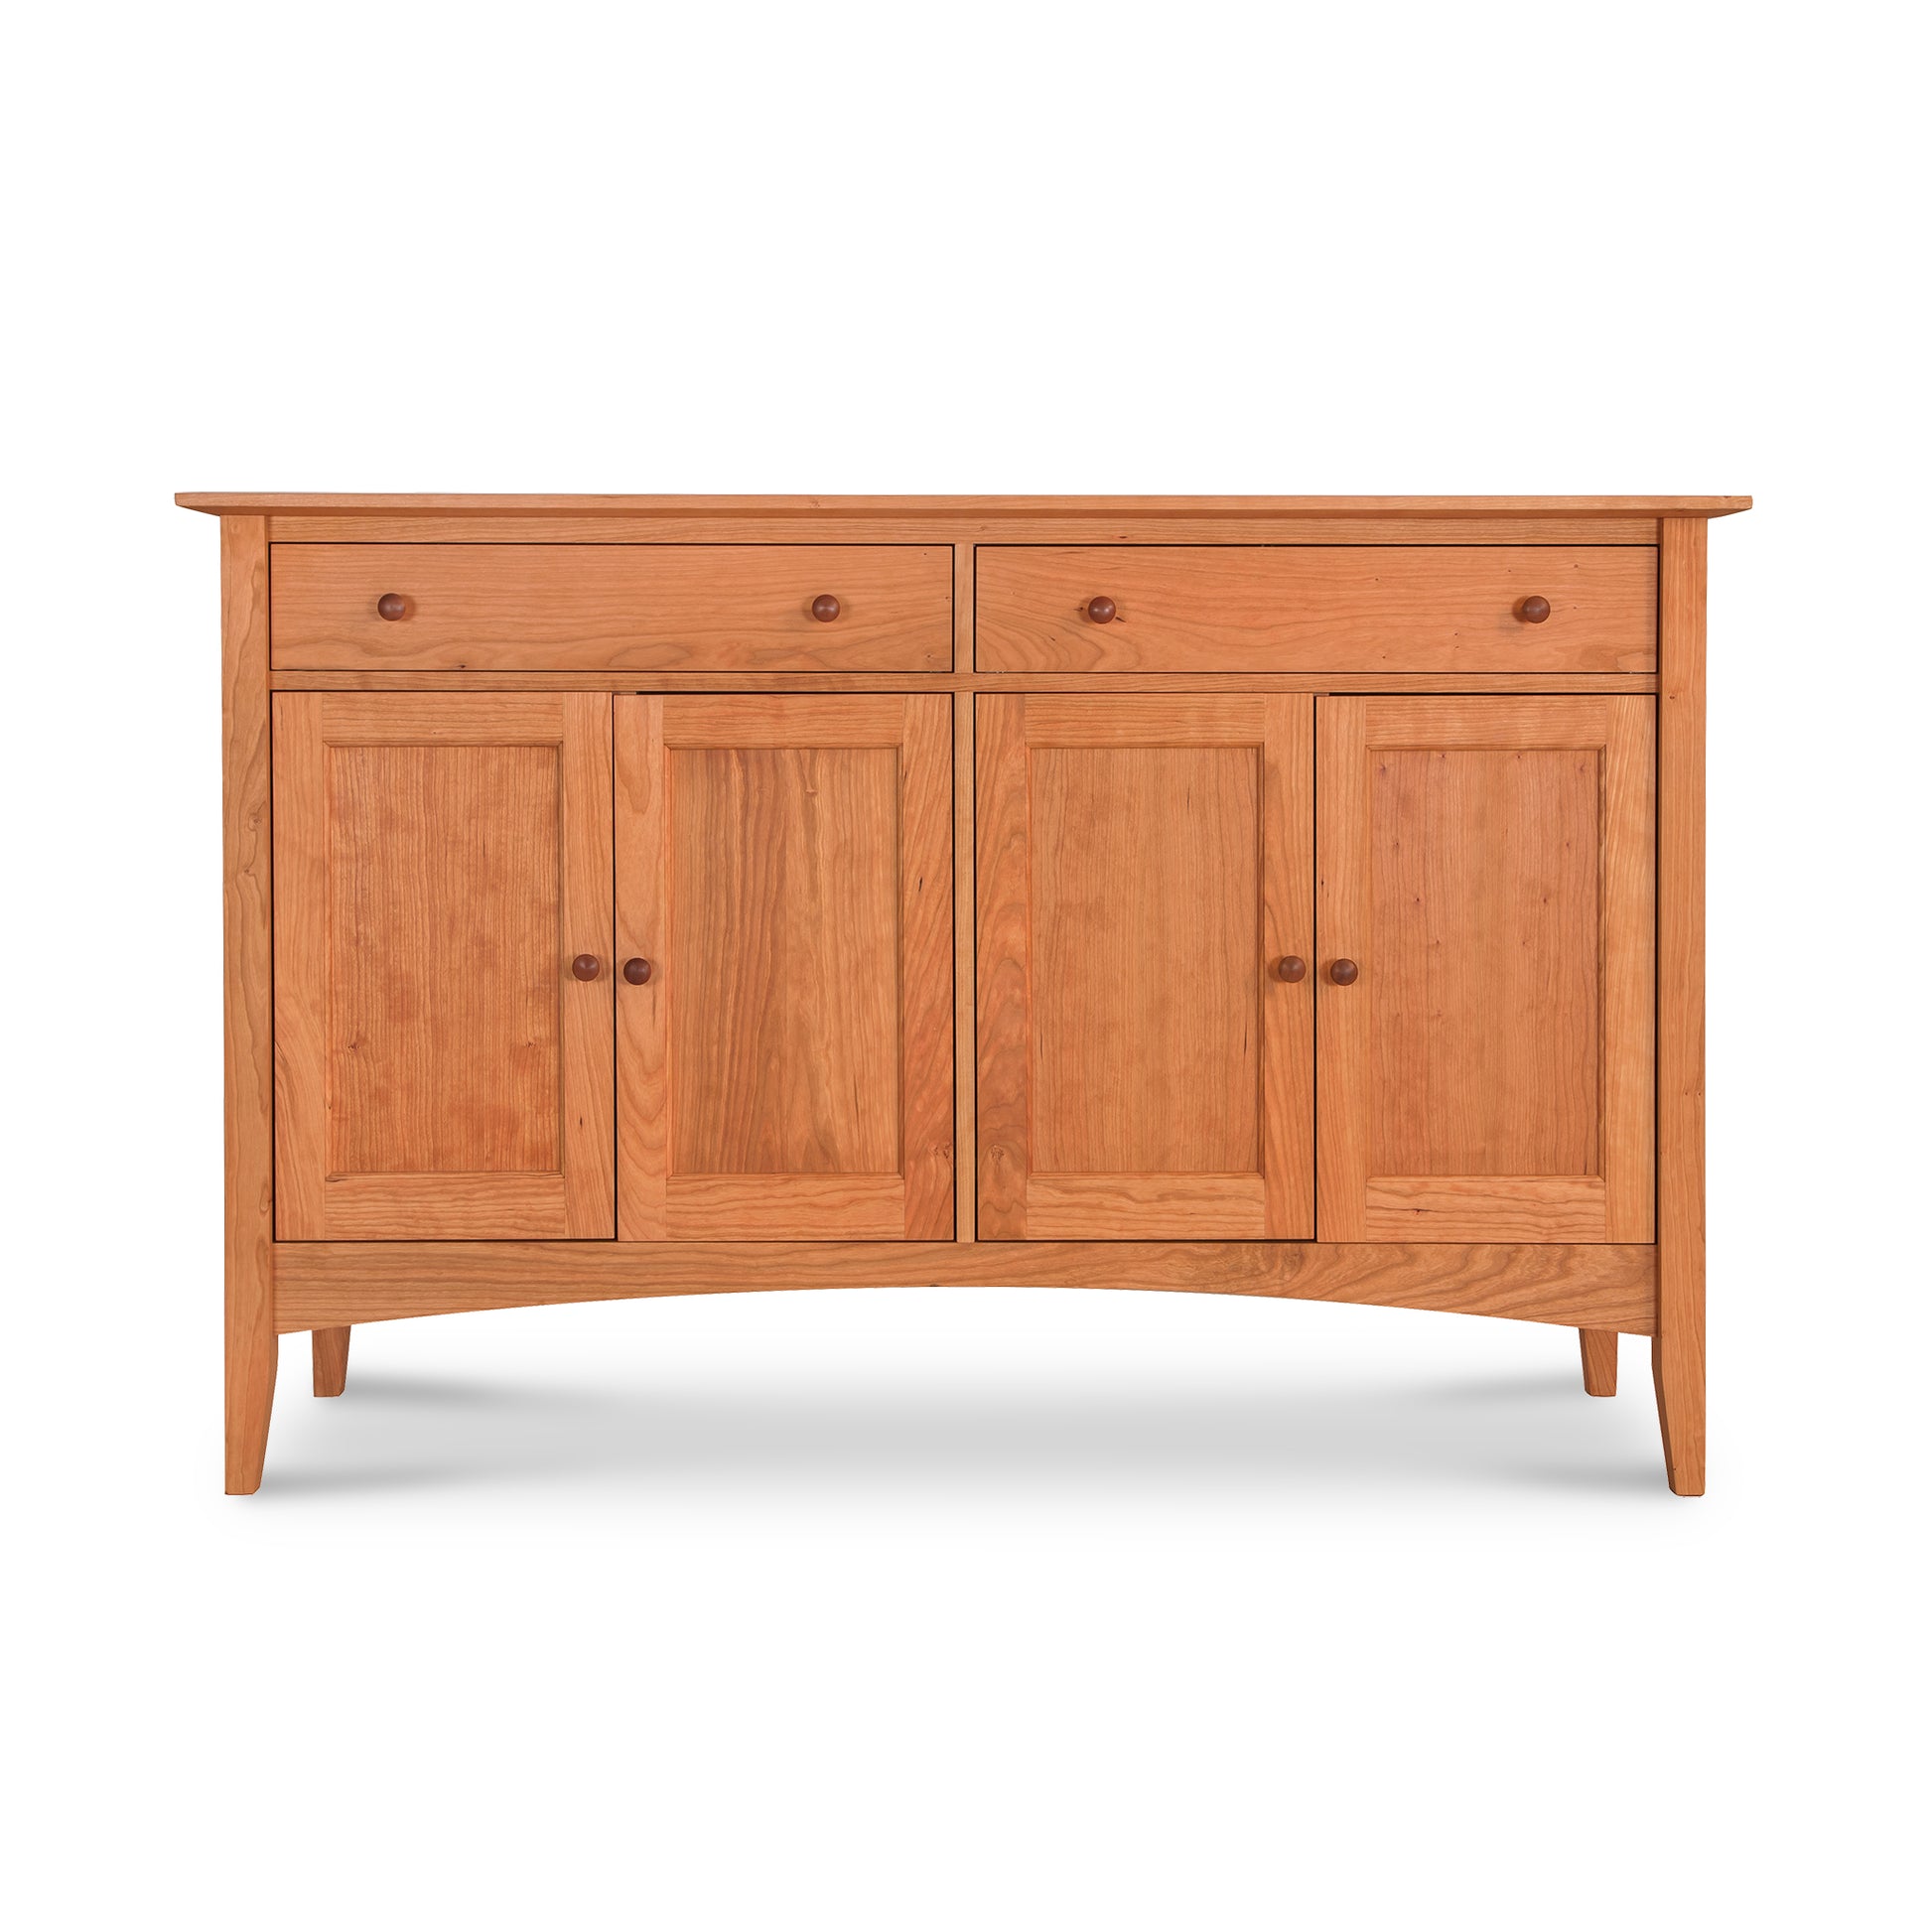 The Maple Corner Woodworks American Shaker Large Sideboard - Floor Model is a wooden sideboard with two doors and two drawers. Crafted in Vermont with solid hardwood construction, this sideboard showcases exquisite Vermont craftsmanship.